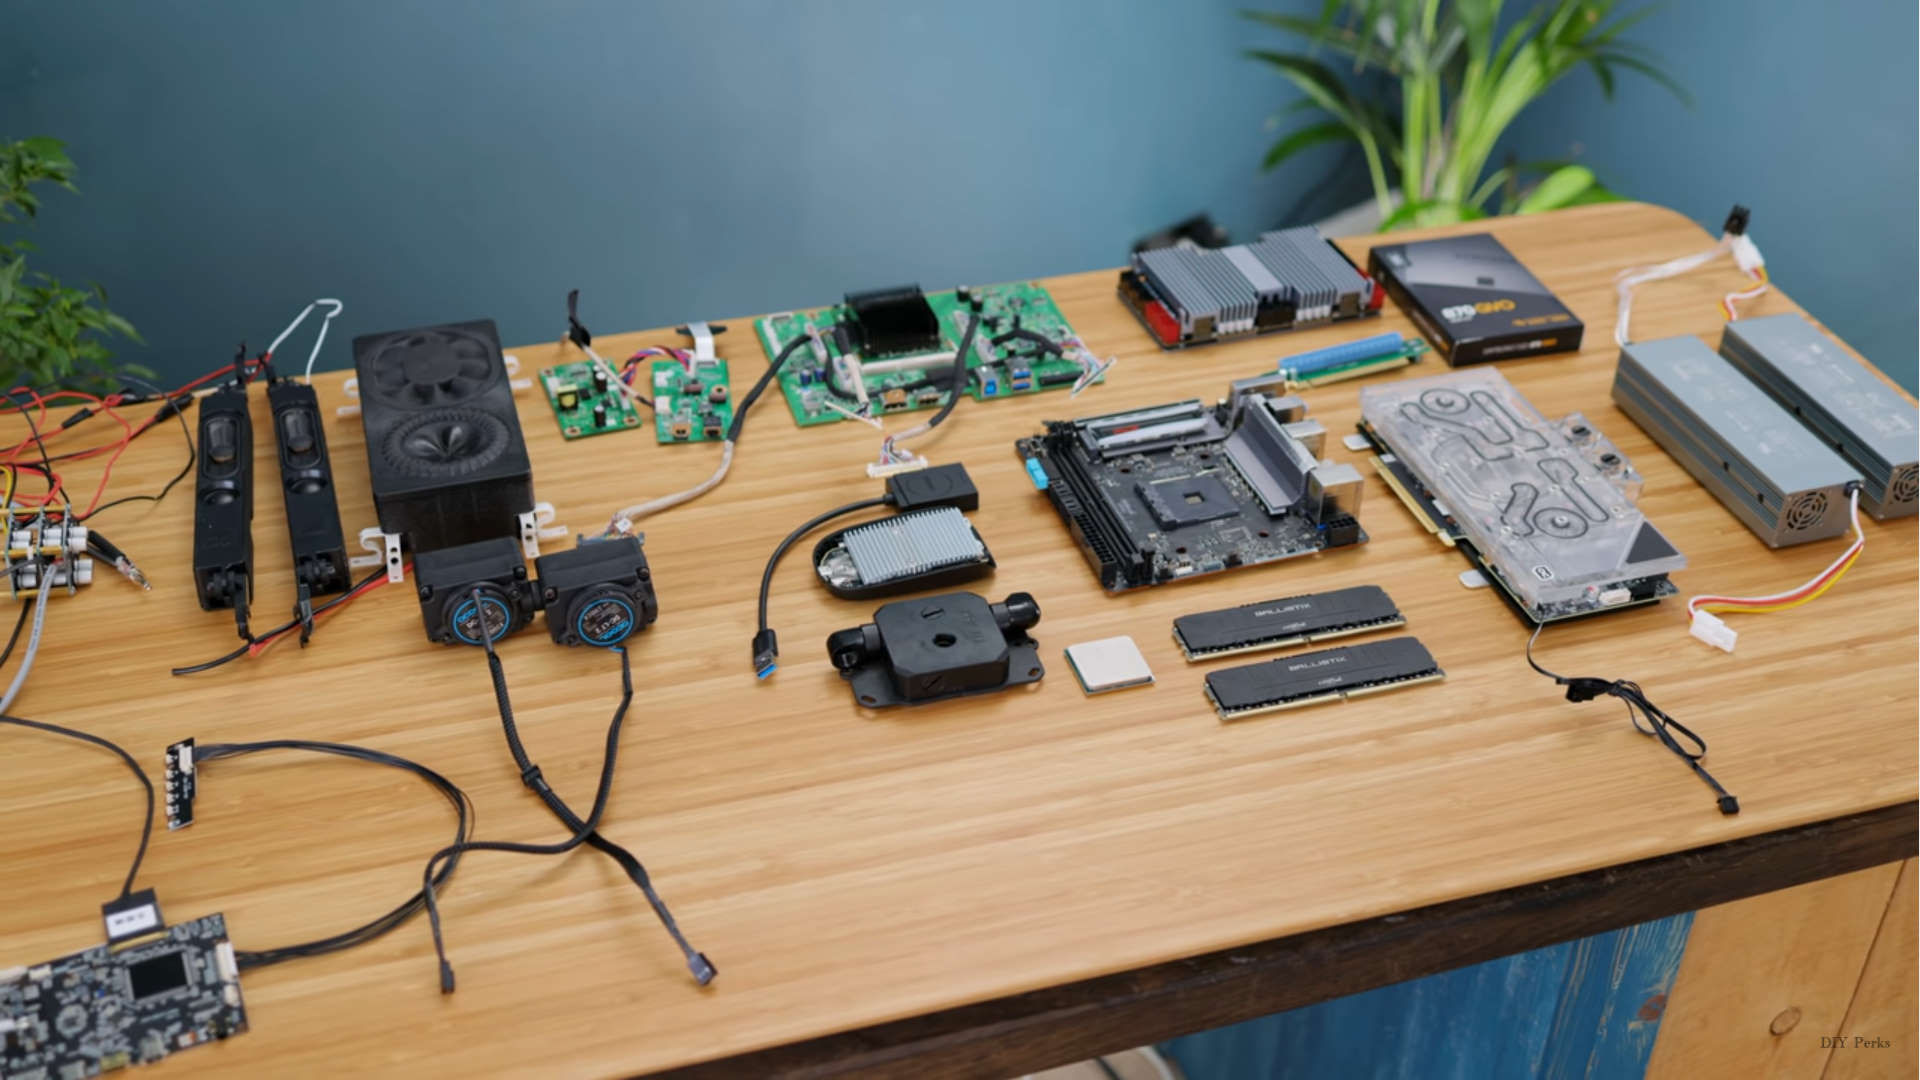 Components laid out on a table for use in a portable all in one PC from DIY Perks